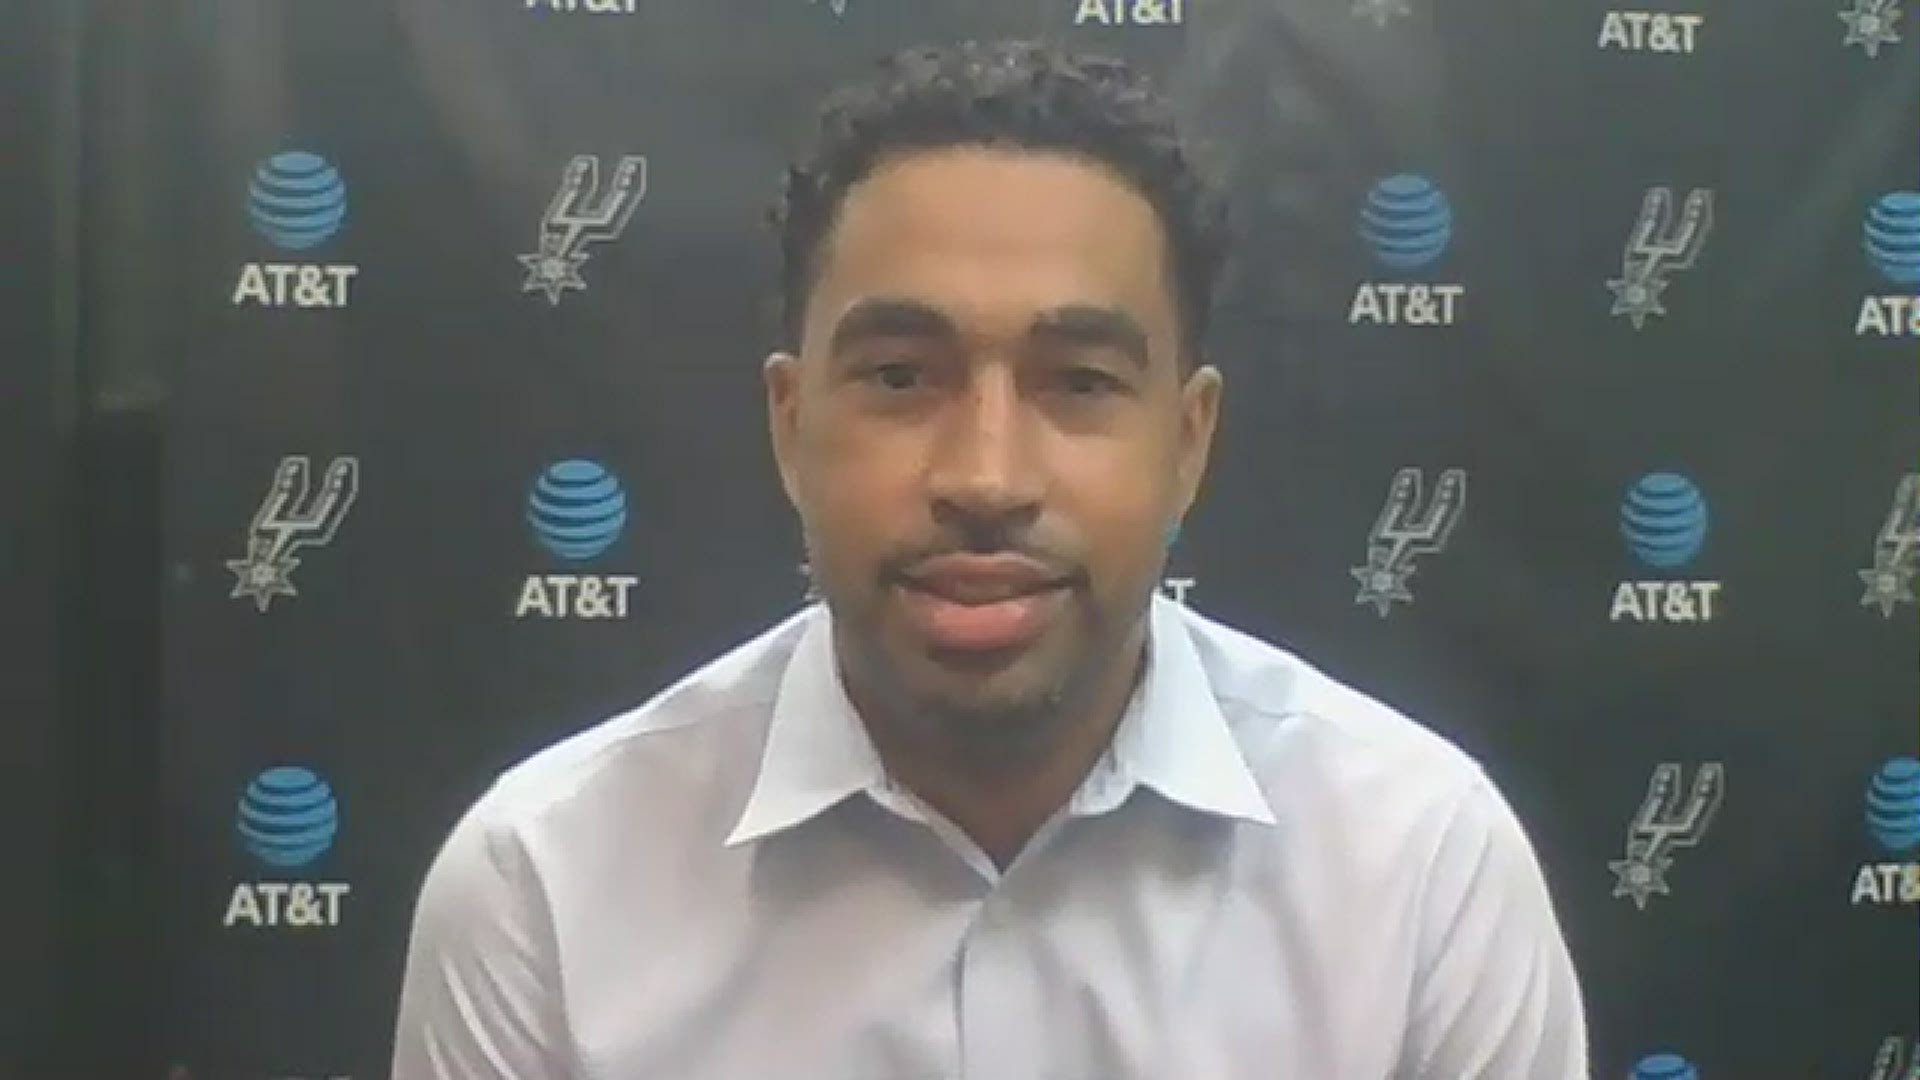 San Antonio's general manager answered questions about the draft picks, trades, free agency, and the direction of the team after the 2020 NBA Draft.